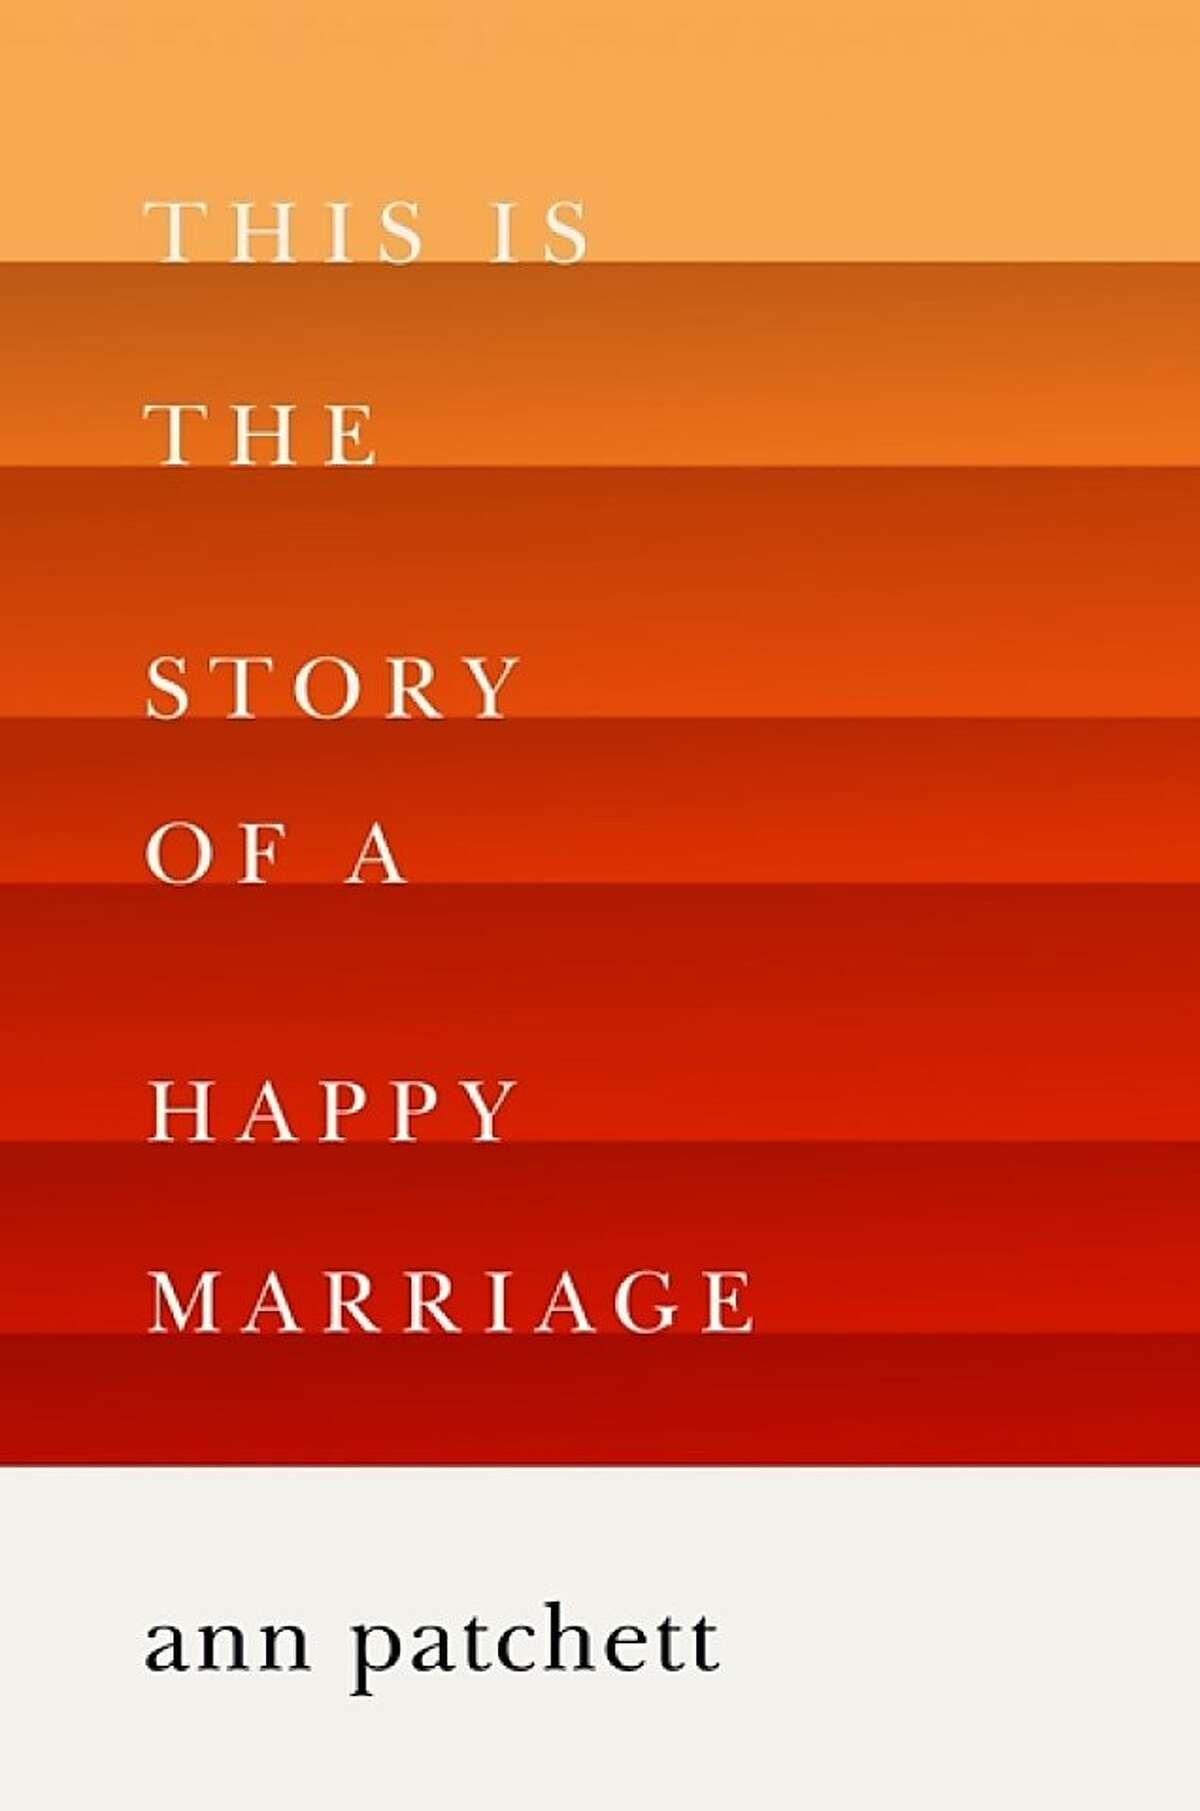 This Is the Story of a Happy Marriage, by Ann Patchett